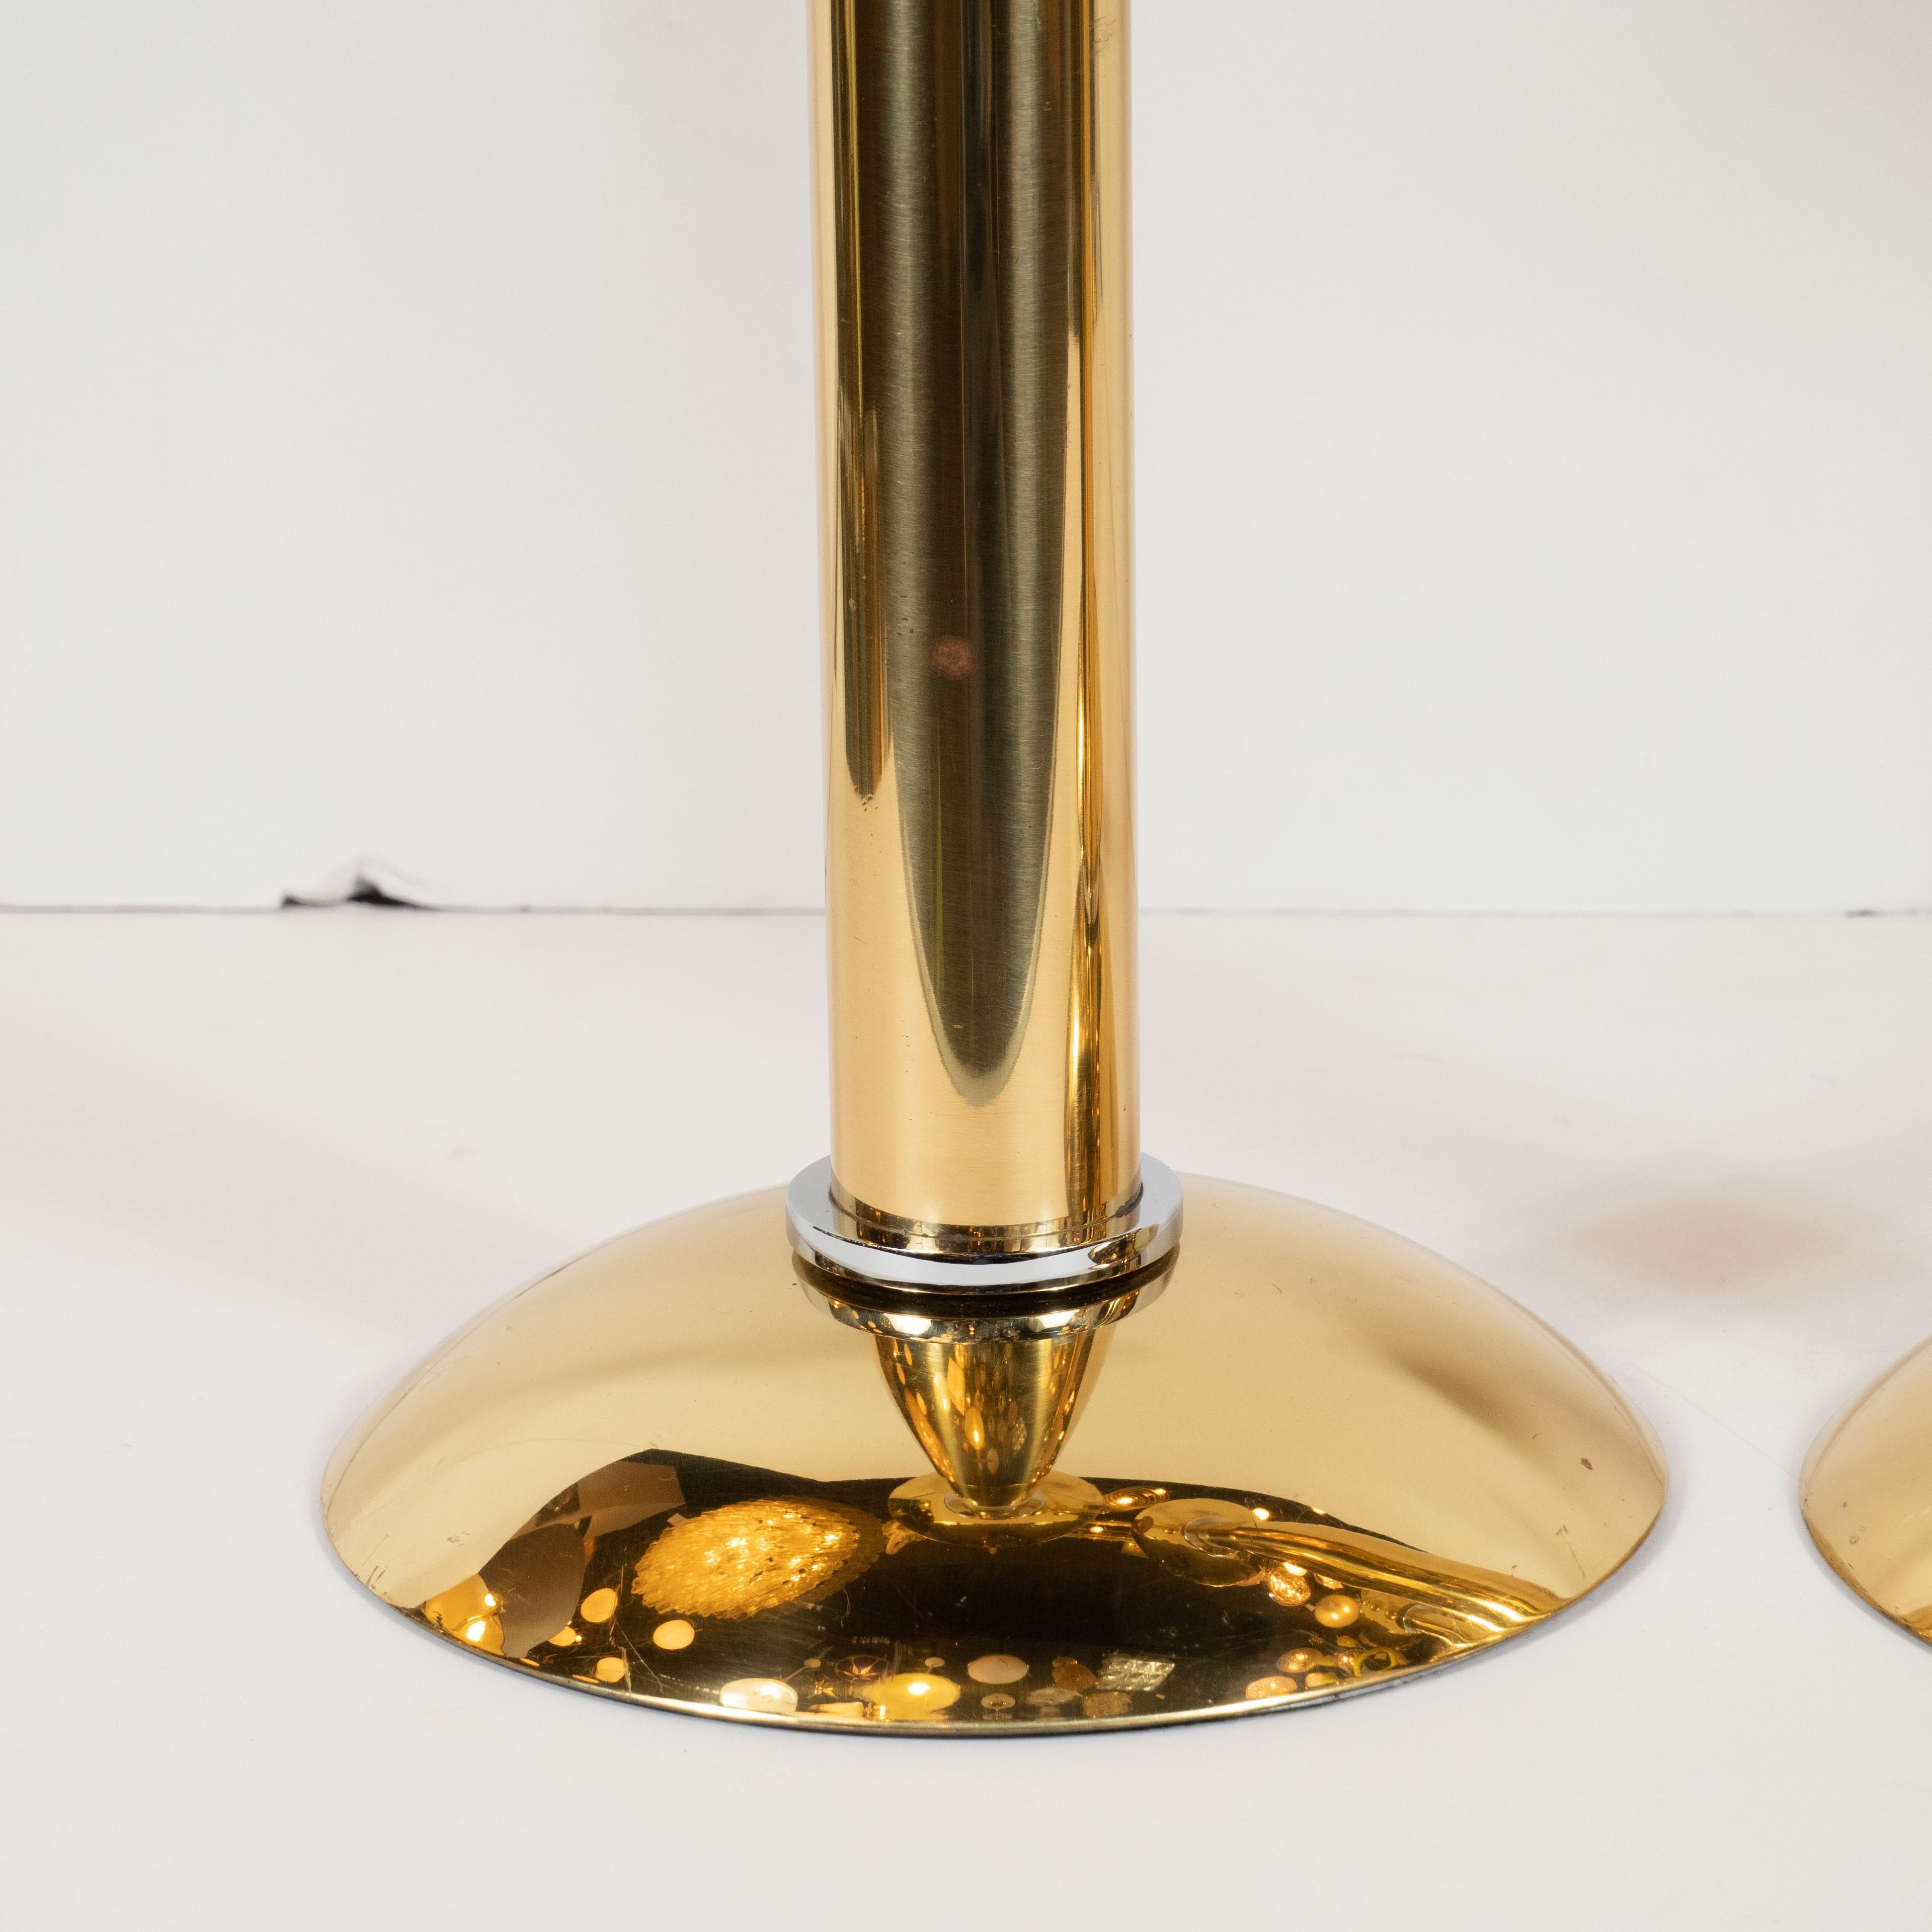 This stunning and dramatic set of candlesticks were realized by Karl Springer- one of the most influential and important designers of the 20th century- in America, circa 1985. It features a concave base and a convex top connected by a cylindrical